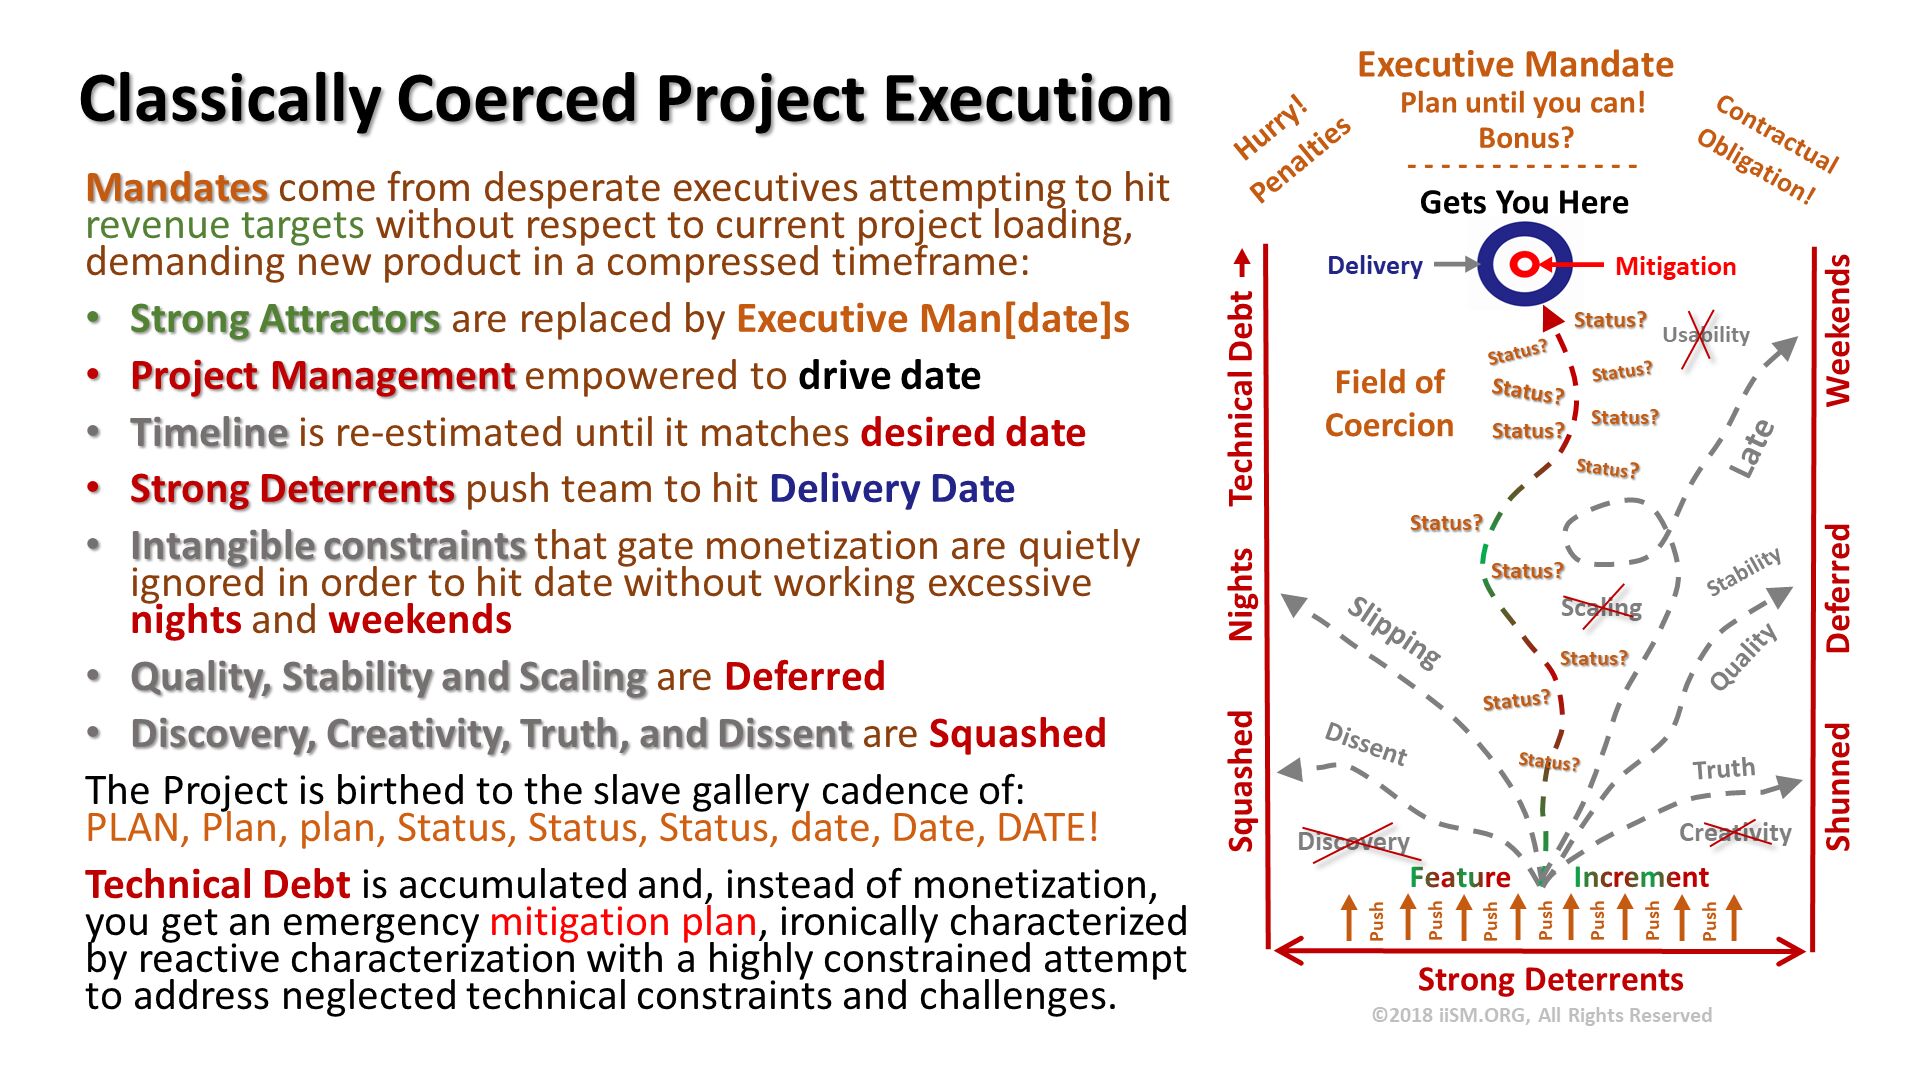 Classically Coerced Project Execution. Mandates come from desperate executives attempting to hit revenue targets without respect to current project loading, demanding new product in a compressed timeframe:
Strong Attractors are replaced by Executive Man[date]s 
Project Management empowered to drive date
Timeline is re-estimated until it matches desired date
Strong Deterrents push team to hit Delivery Date
Intangible constraints that gate monetization are quietly ignored in order to hit date without working excessive nights and weekends
Quality, Stability and Scaling are Deferred
Discovery, Creativity, Truth, and Dissent are Squashed
The Project is birthed to the slave gallery cadence of: PLAN, Plan, plan, Status, Status, Status, date, Date, DATE!
Technical Debt is accumulated and, instead of monetization, you get an emergency mitigation plan, ironically characterized by reactive characterization with a highly constrained attempt to address neglected technical constraints and challenges.
. 